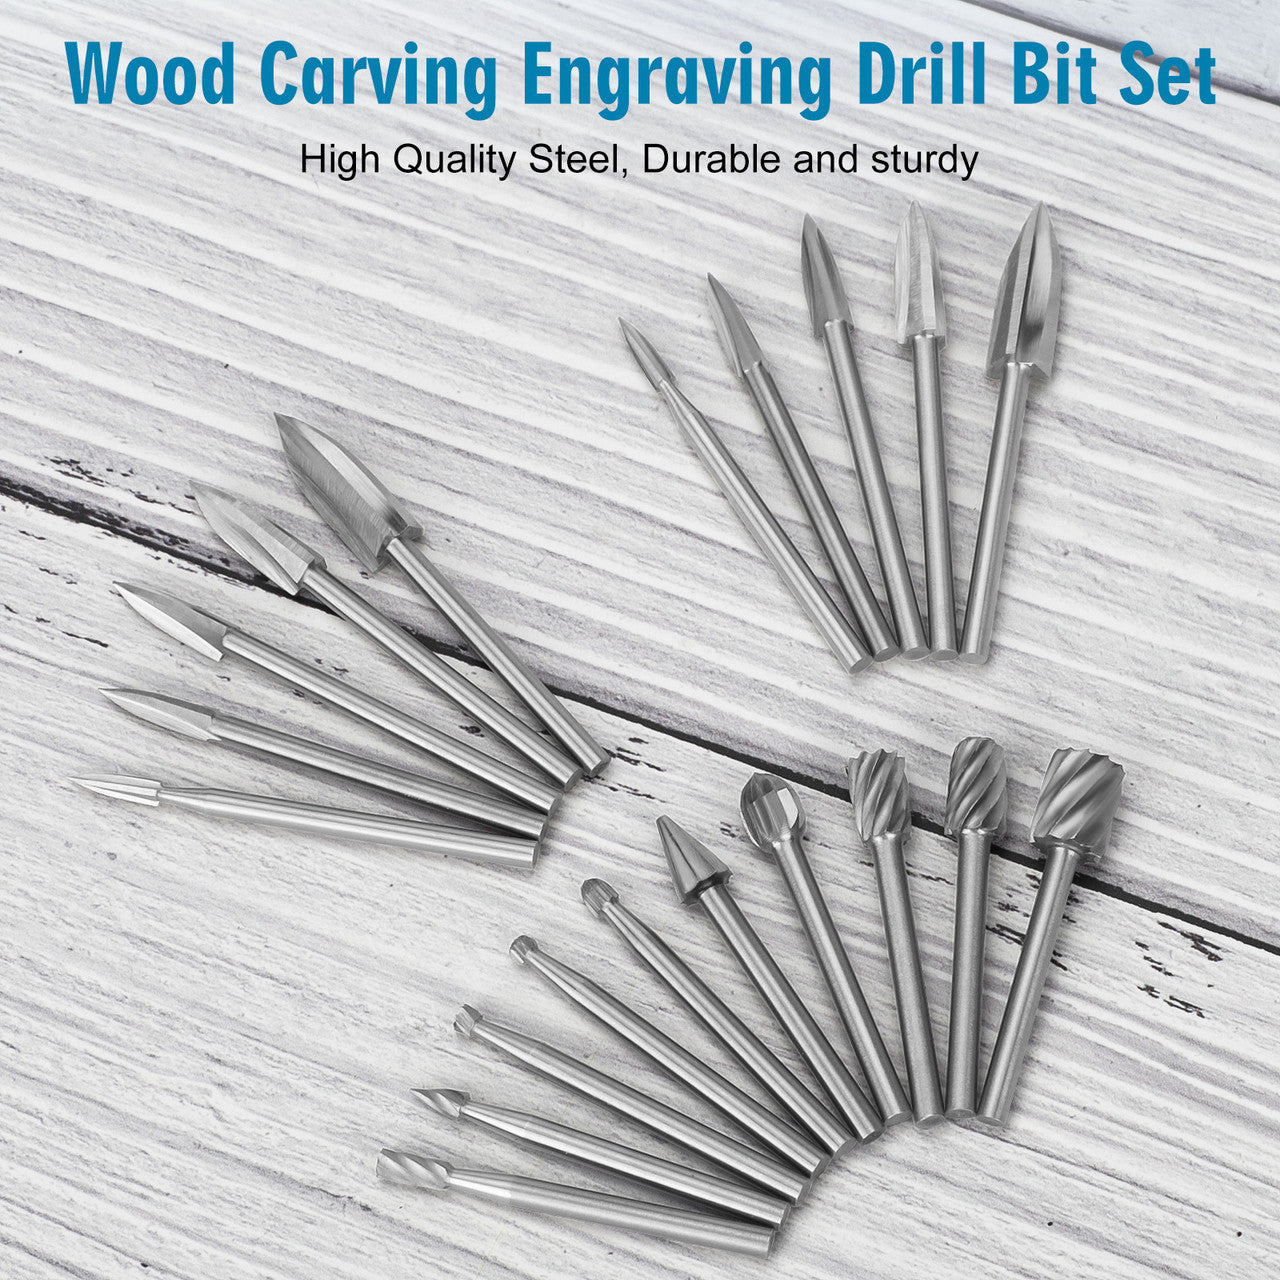 Wood Carving Drill Bit Set for DIY Projects and Home Improvement, 20pcs